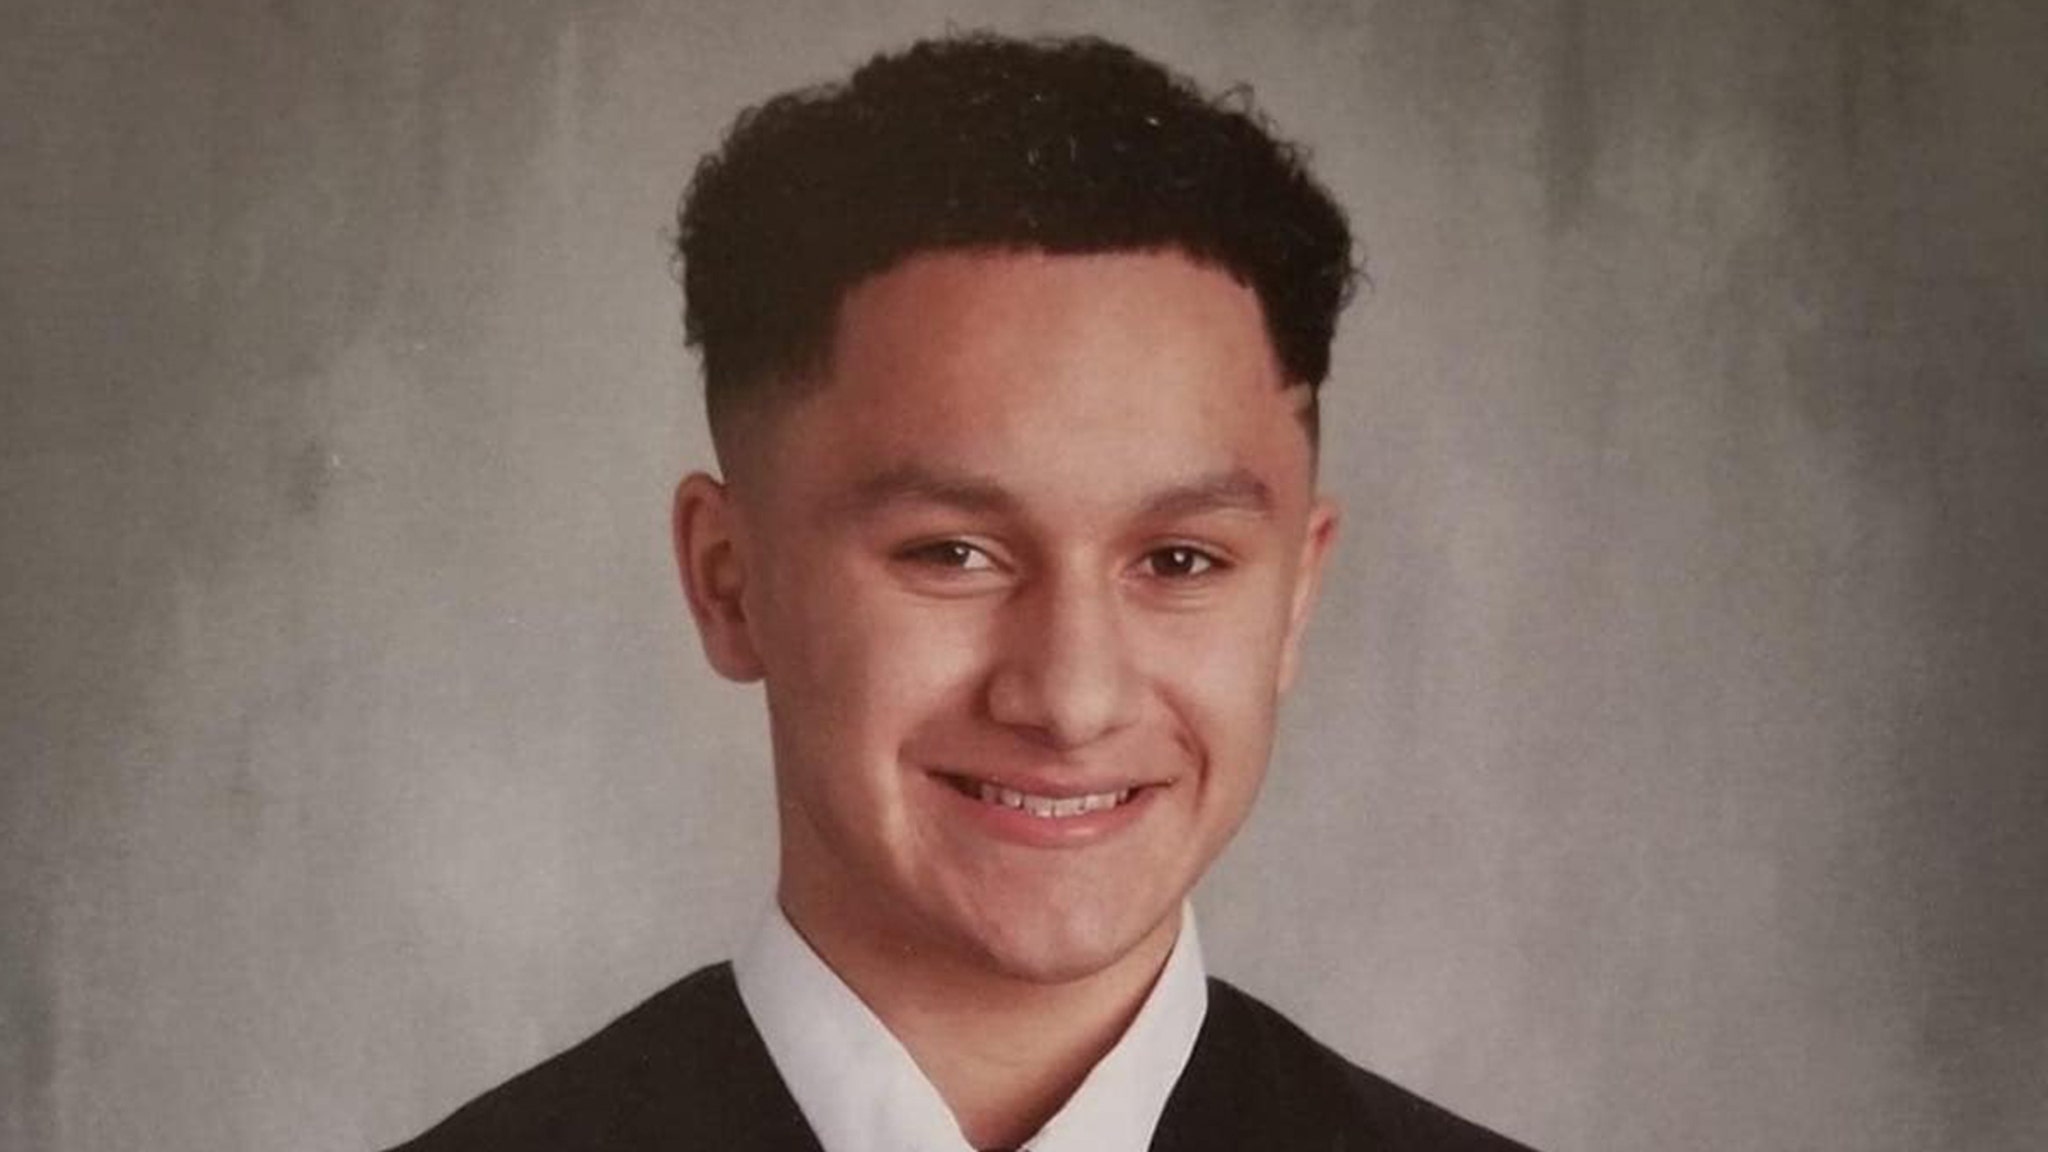 New Jersey High School Football Player Dies After Traumatic Head Injury